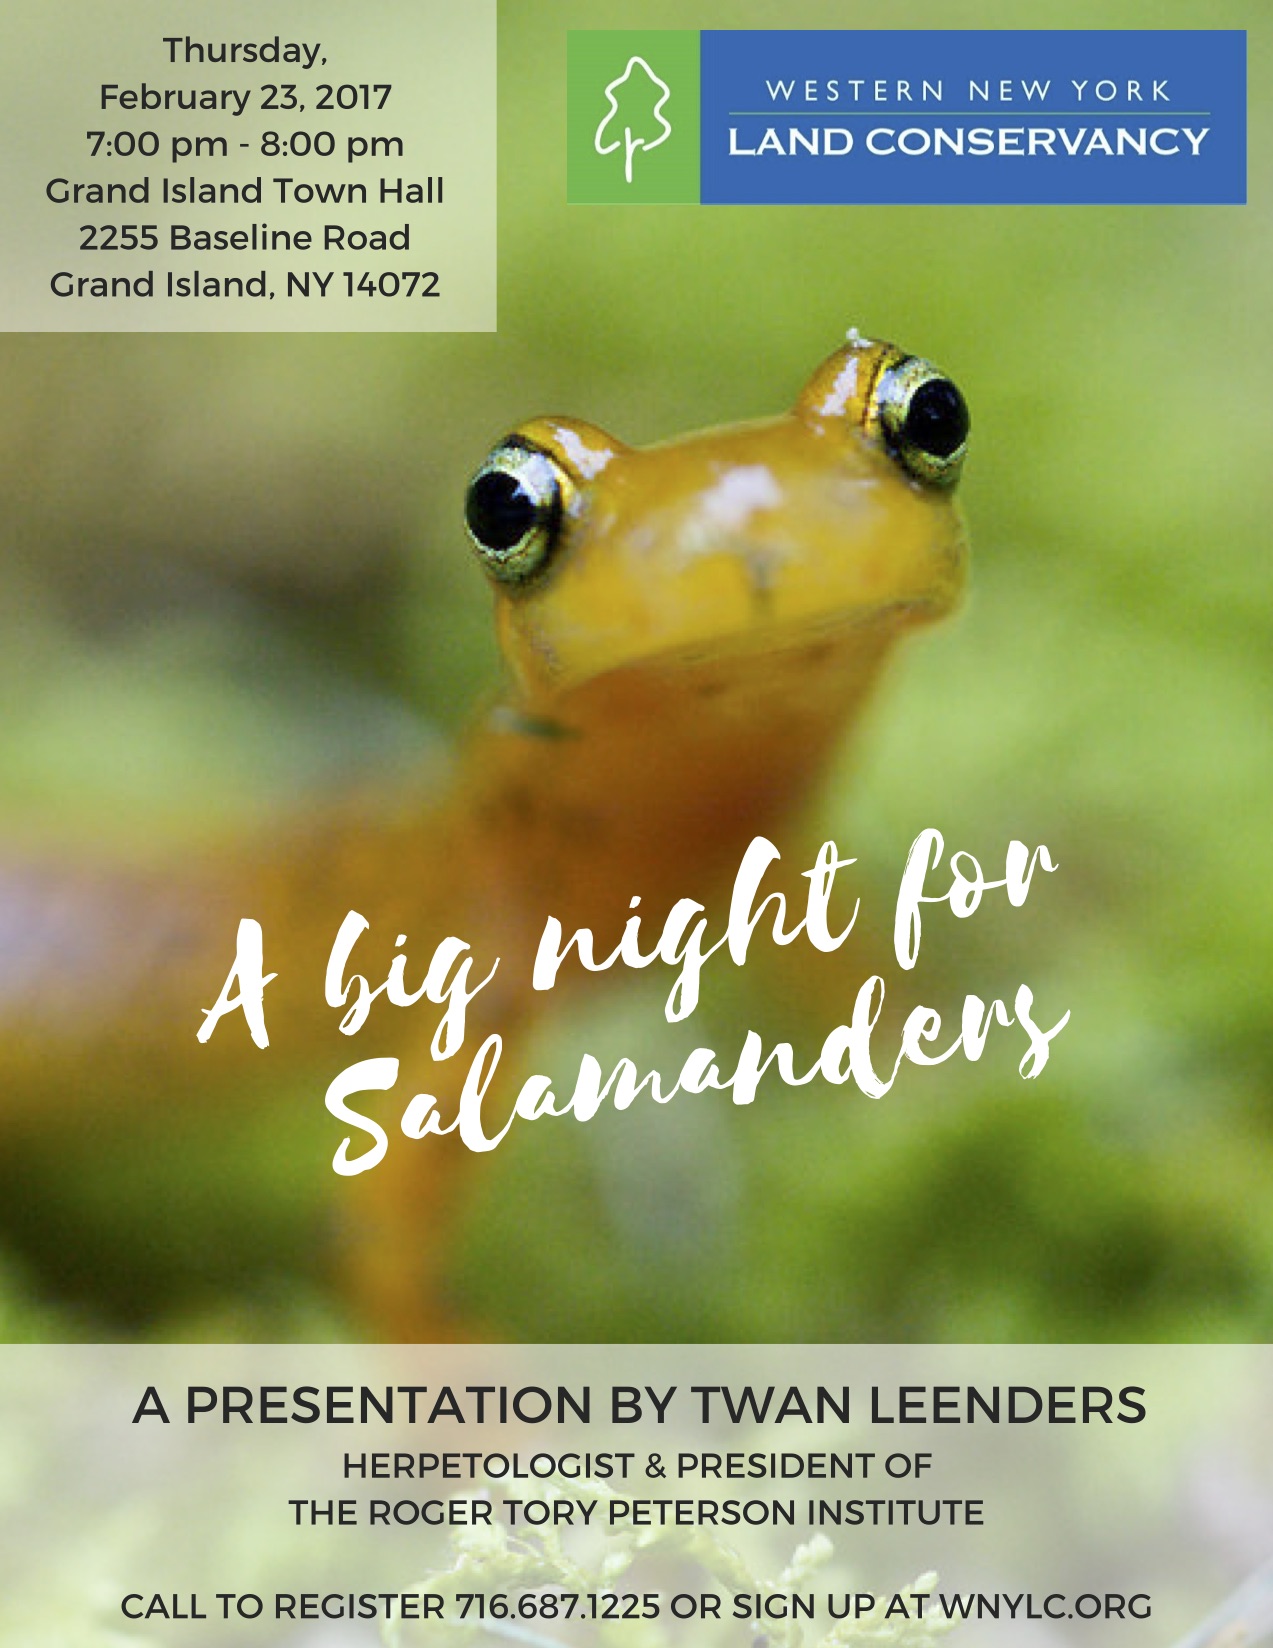 Land Conservancy to host talk about the salamanders’ big night